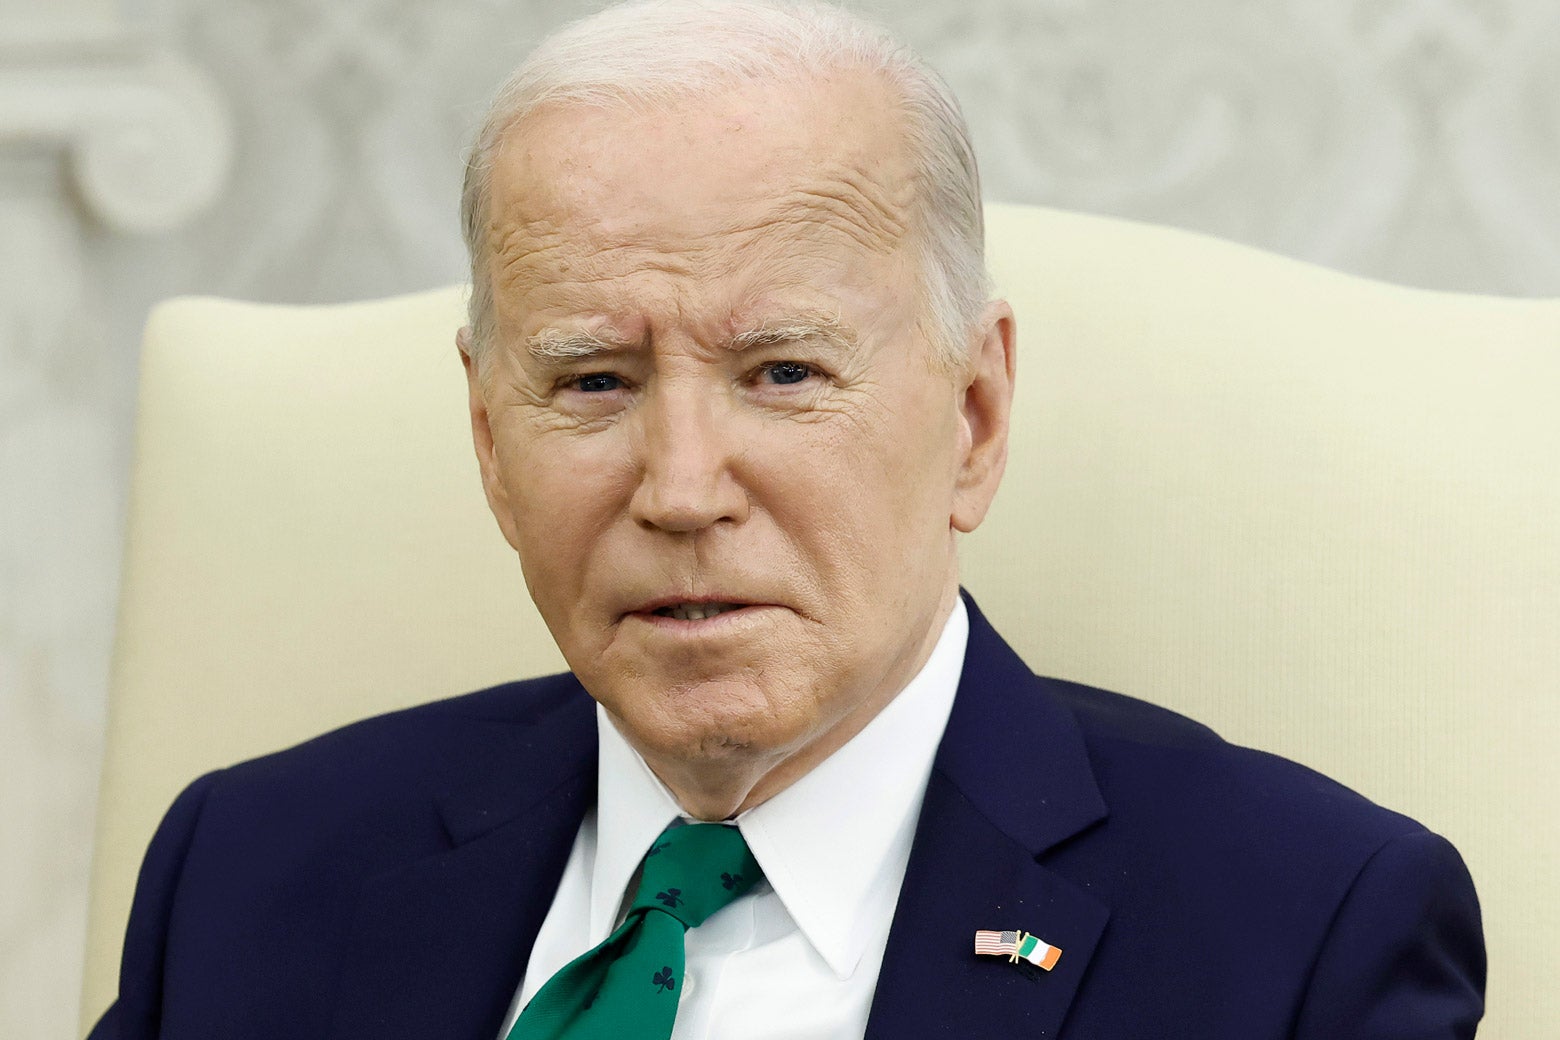 Biden seeming to grimace wearing a blue suit and sitting on a peach chair.